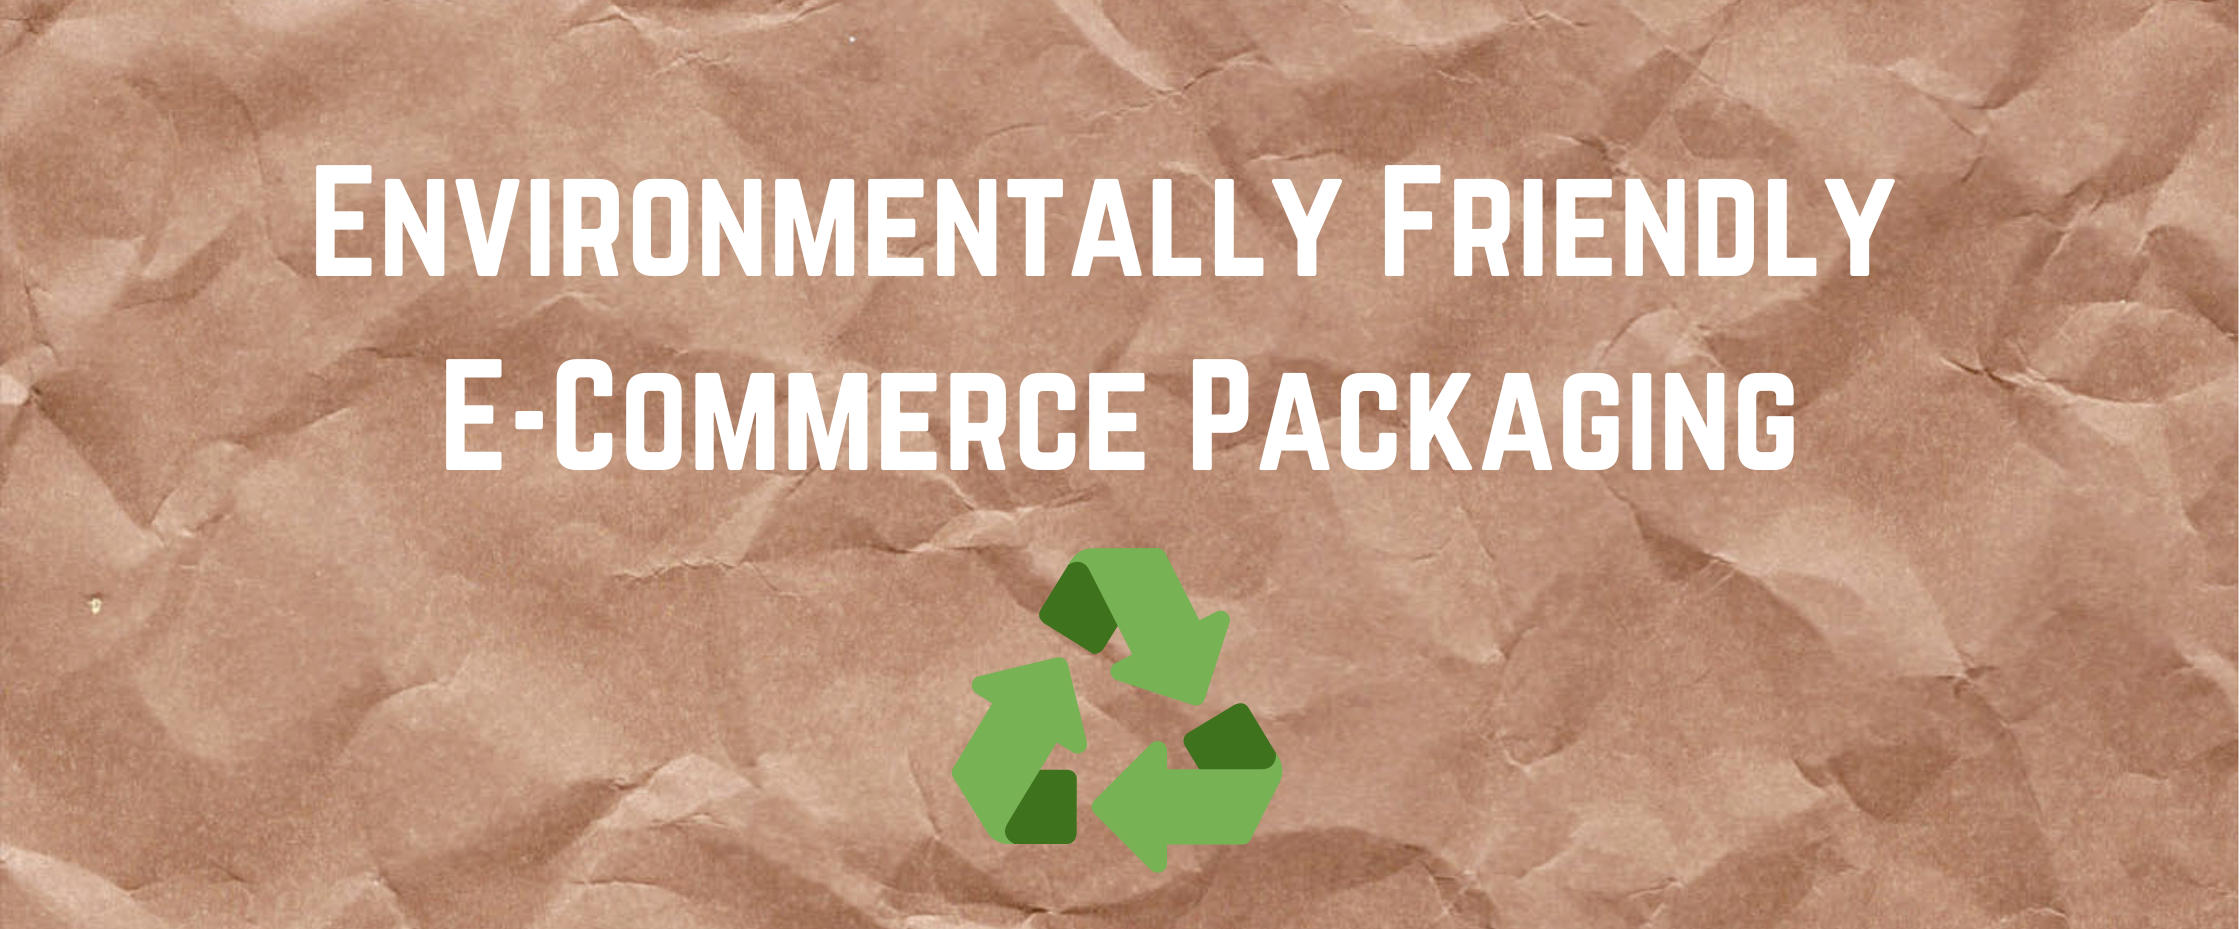 Eco-Friendly Packaging for E-Commerce: What You Need to Know